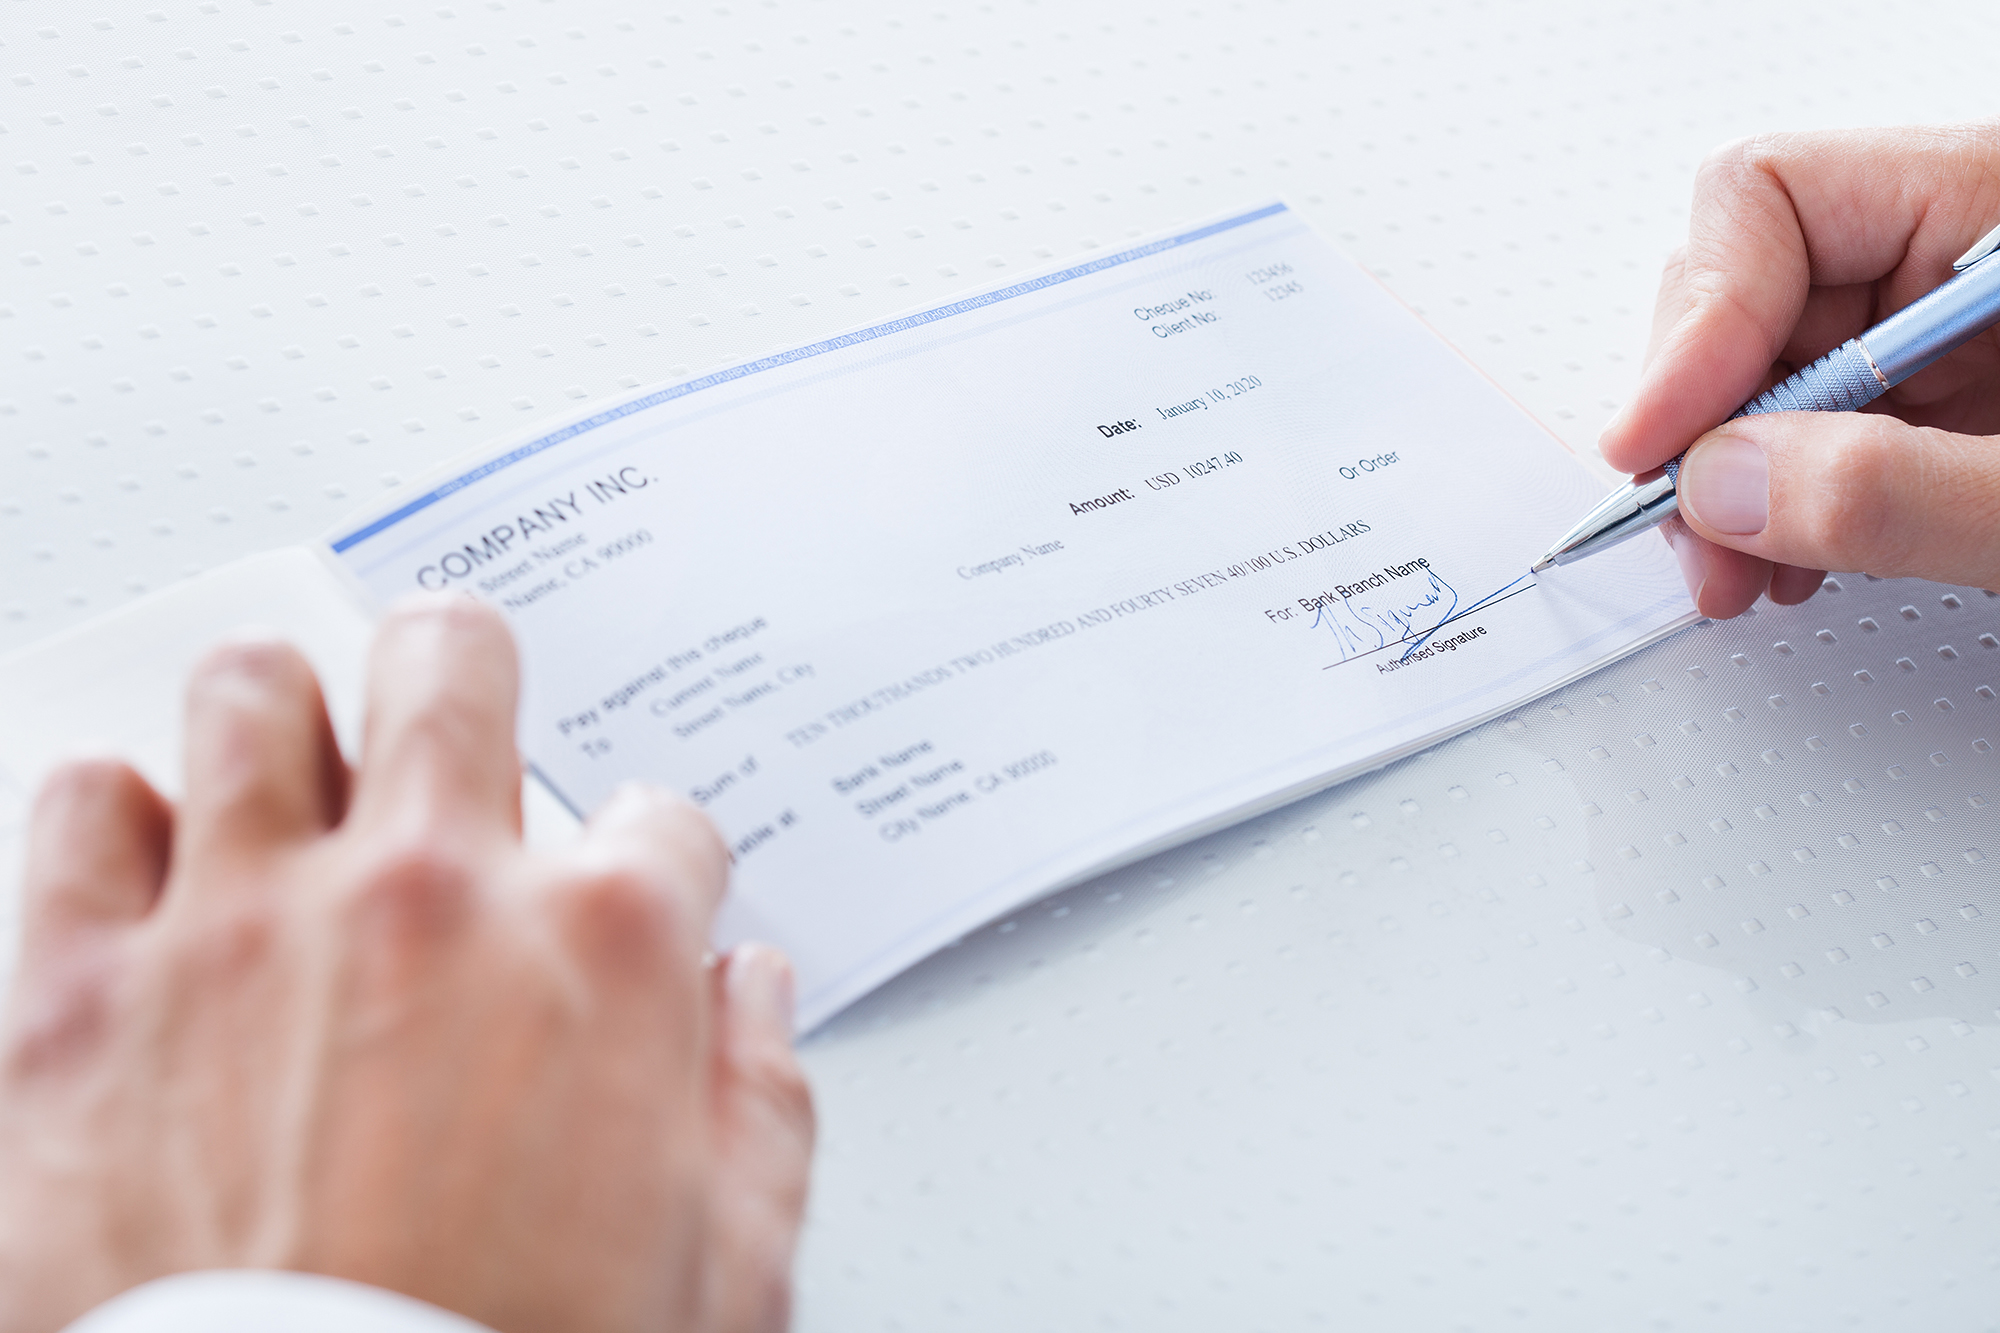 Ethical Consequences Of Counterfeit Check Scams Lawyers Mutual 